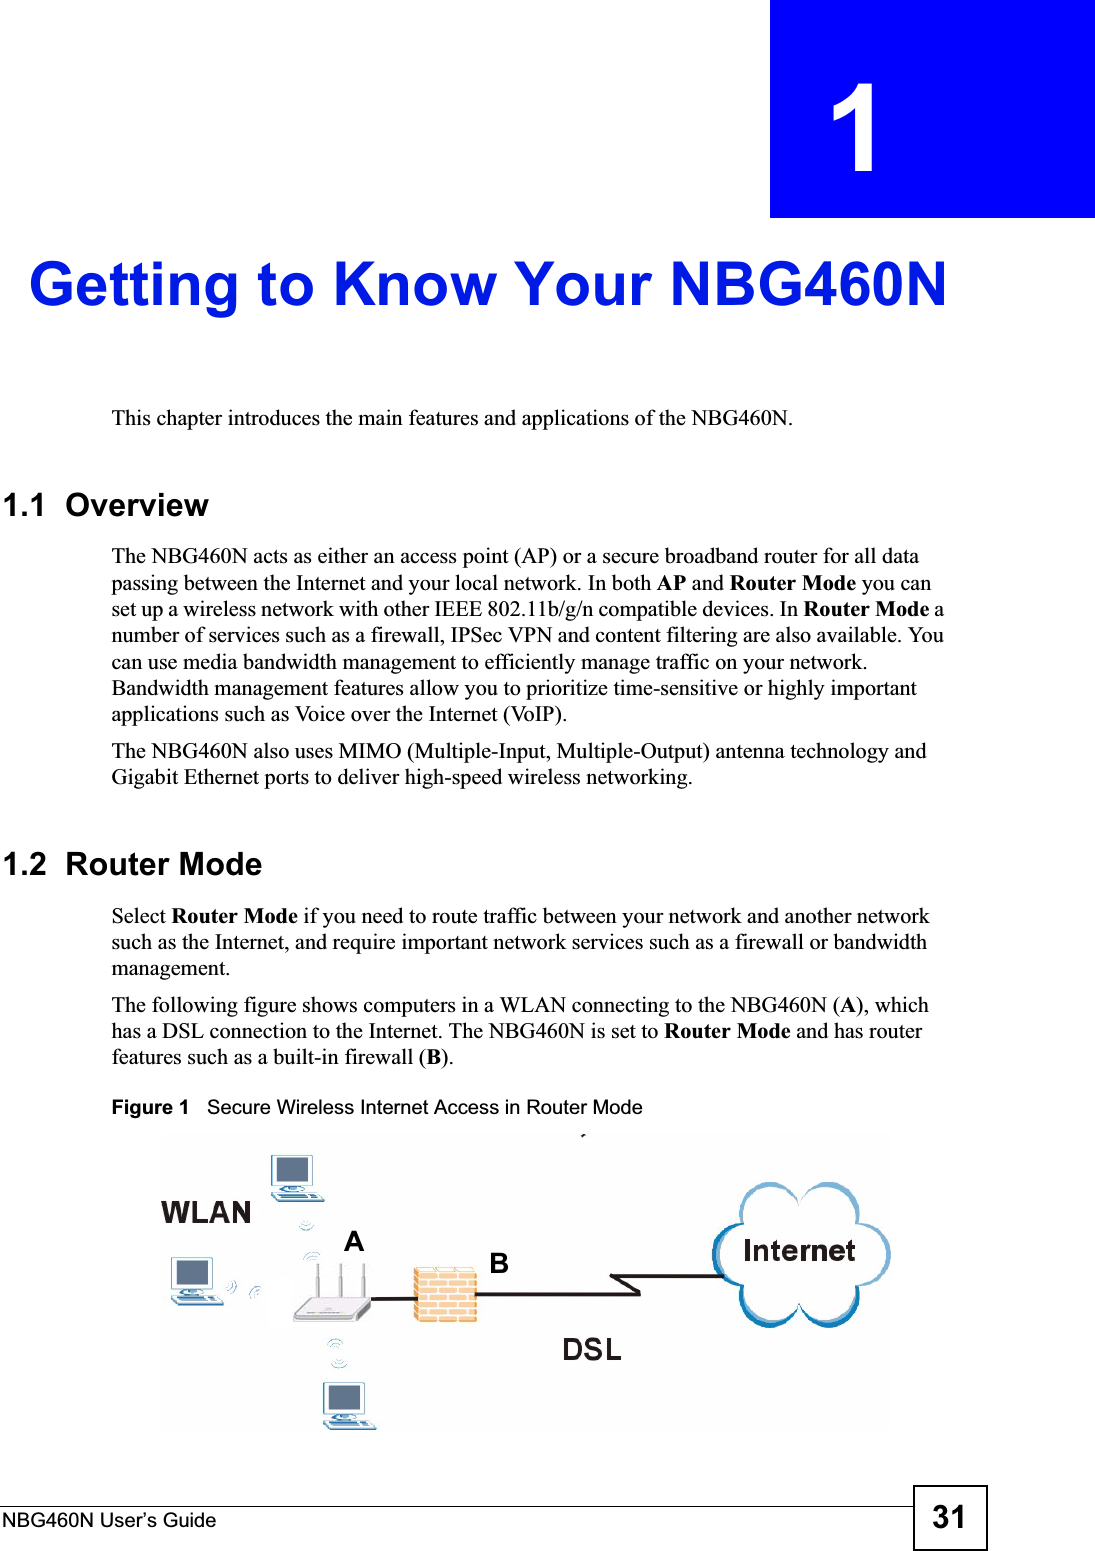 NBG460N User’s Guide 31CHAPTER  1 Getting to Know Your NBG460NThis chapter introduces the main features and applications of the NBG460N.1.1  OverviewThe NBG460N acts as either an access point (AP) or a secure broadband router for all data passing between the Internet and your local network. In both AP and Router Mode you can set up a wireless network with other IEEE 802.11b/g/n compatible devices. In Router Mode a number of services such as a firewall, IPSec VPN and content filtering are also available. You can use media bandwidth management to efficiently manage traffic on your network. Bandwidth management features allow you to prioritize time-sensitive or highly important applications such as Voice over the Internet (VoIP).The NBG460N also uses MIMO (Multiple-Input, Multiple-Output) antenna technology and Gigabit Ethernet ports to deliver high-speed wireless networking.1.2  Router ModeSelect Router Mode if you need to route traffic between your network and another network such as the Internet, and require important network services such as a firewall or bandwidth management. The following figure shows computers in a WLAN connecting to the NBG460N (A), which has a DSL connection to the Internet. The NBG460N is set to Router Mode and has router features such as a built-in firewall (B).Figure 1   Secure Wireless Internet Access in Router Mode AB